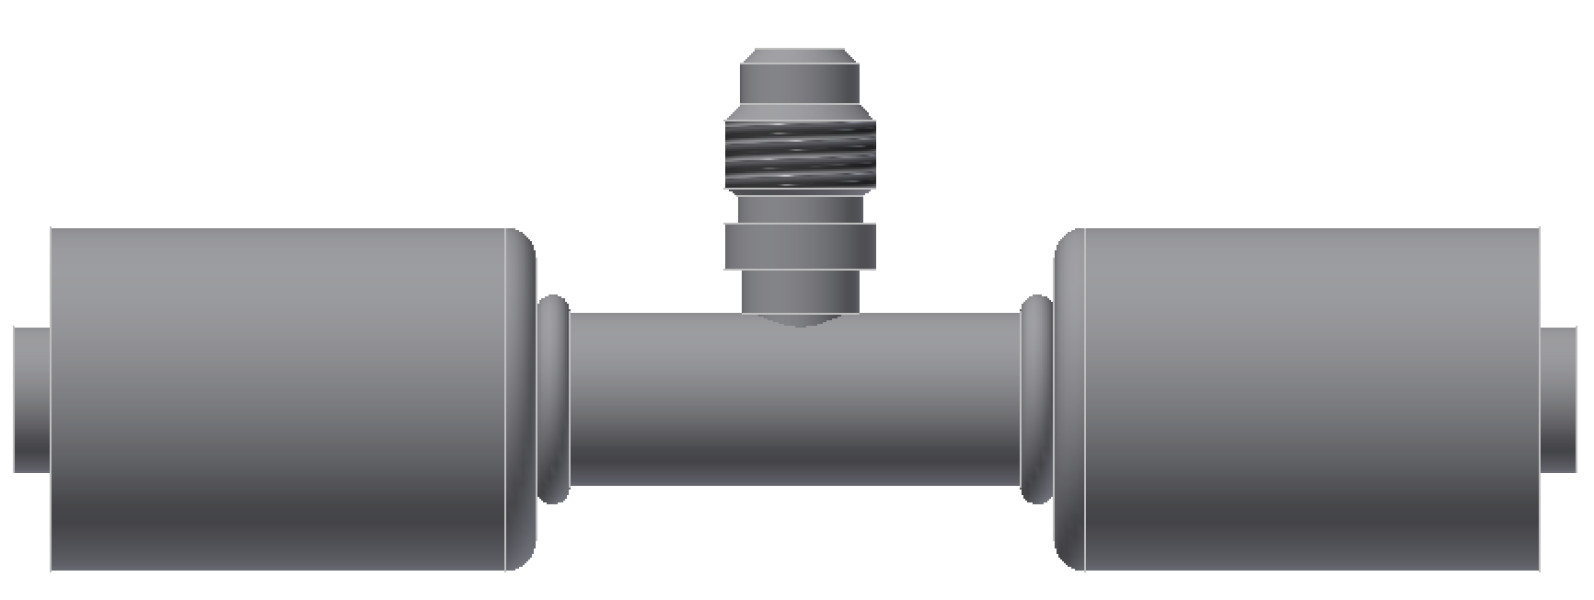 Image of A/C Refrigerant Hose Fitting from Sunair. Part number: SA-7020-06-06S